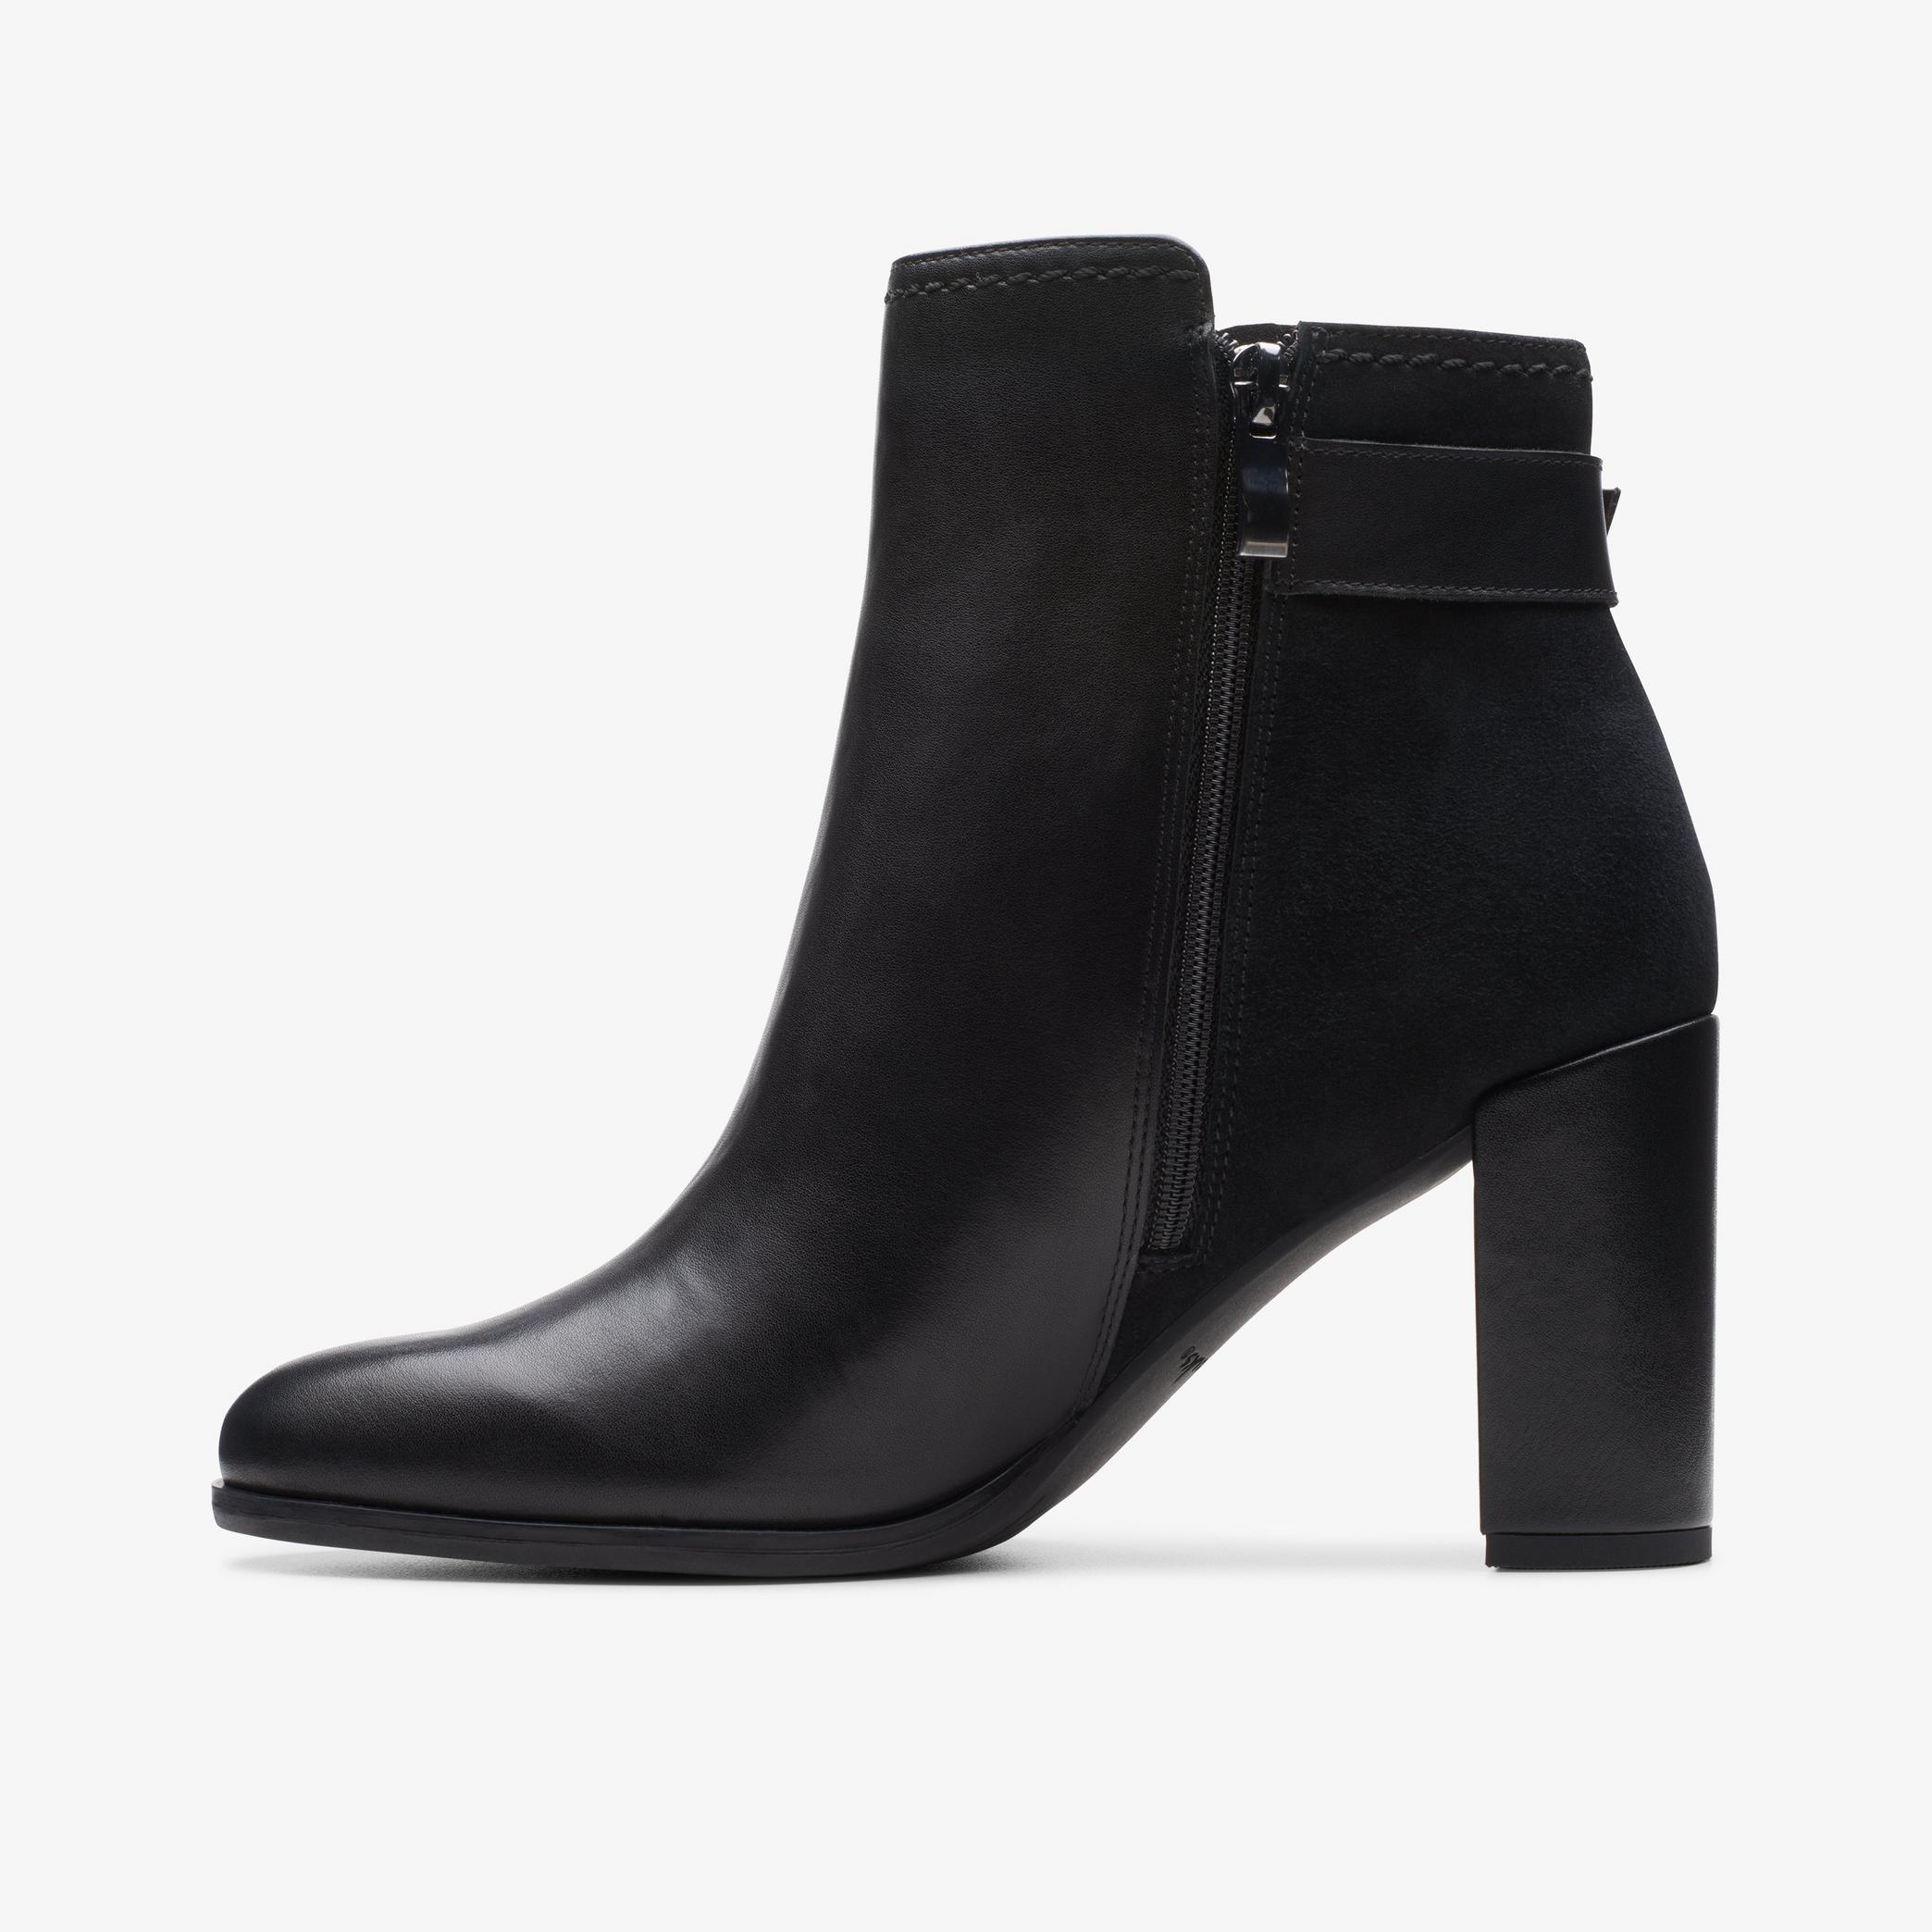 Freva 85 Buckle Black Leather Ankle Boots, view 3 of 8